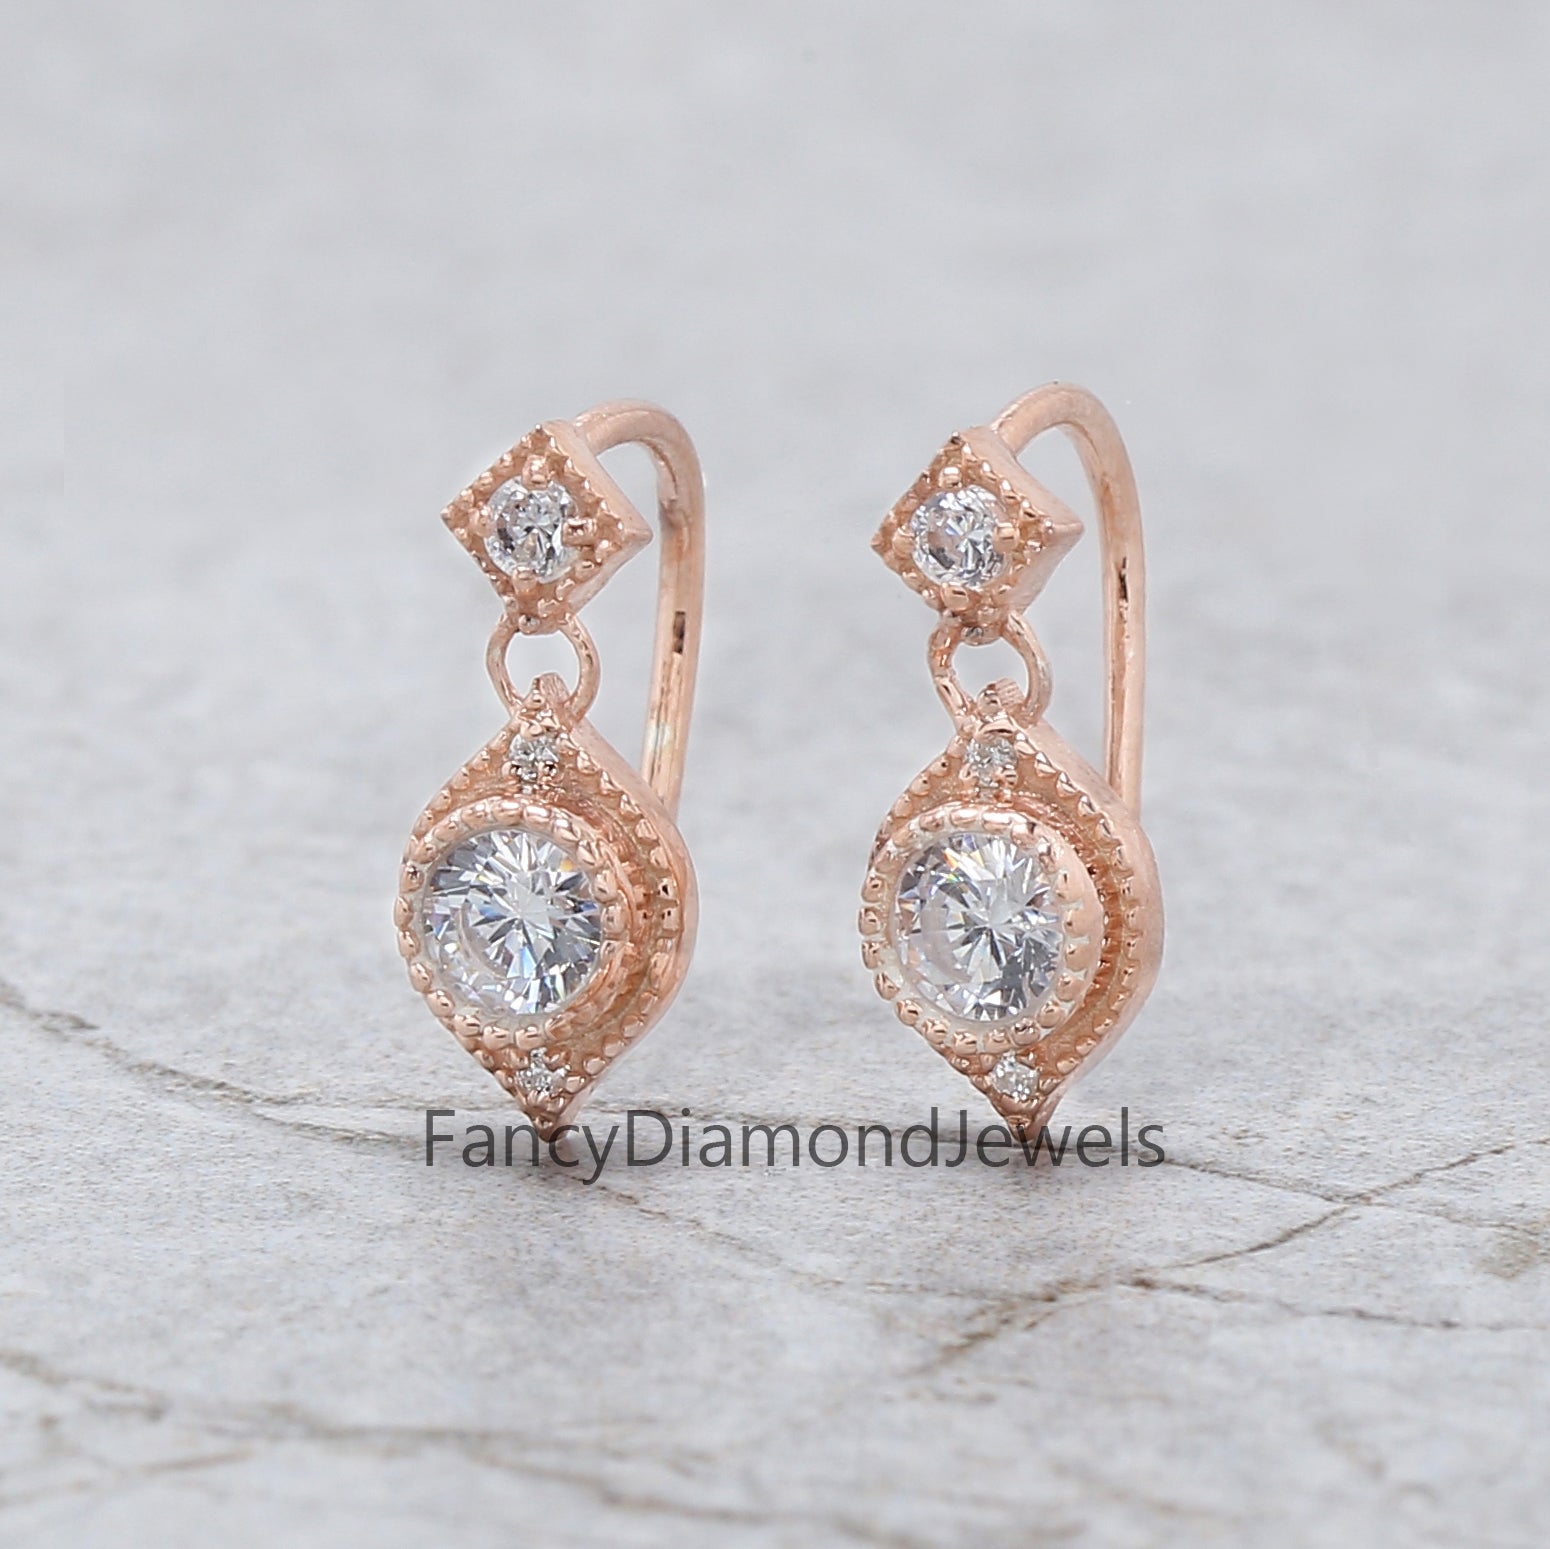 Round White Color Diamond Earring Engagement Wedding Gift Earring 14K Solid Rose White Yellow Gold Earring 0.42 CT KD994